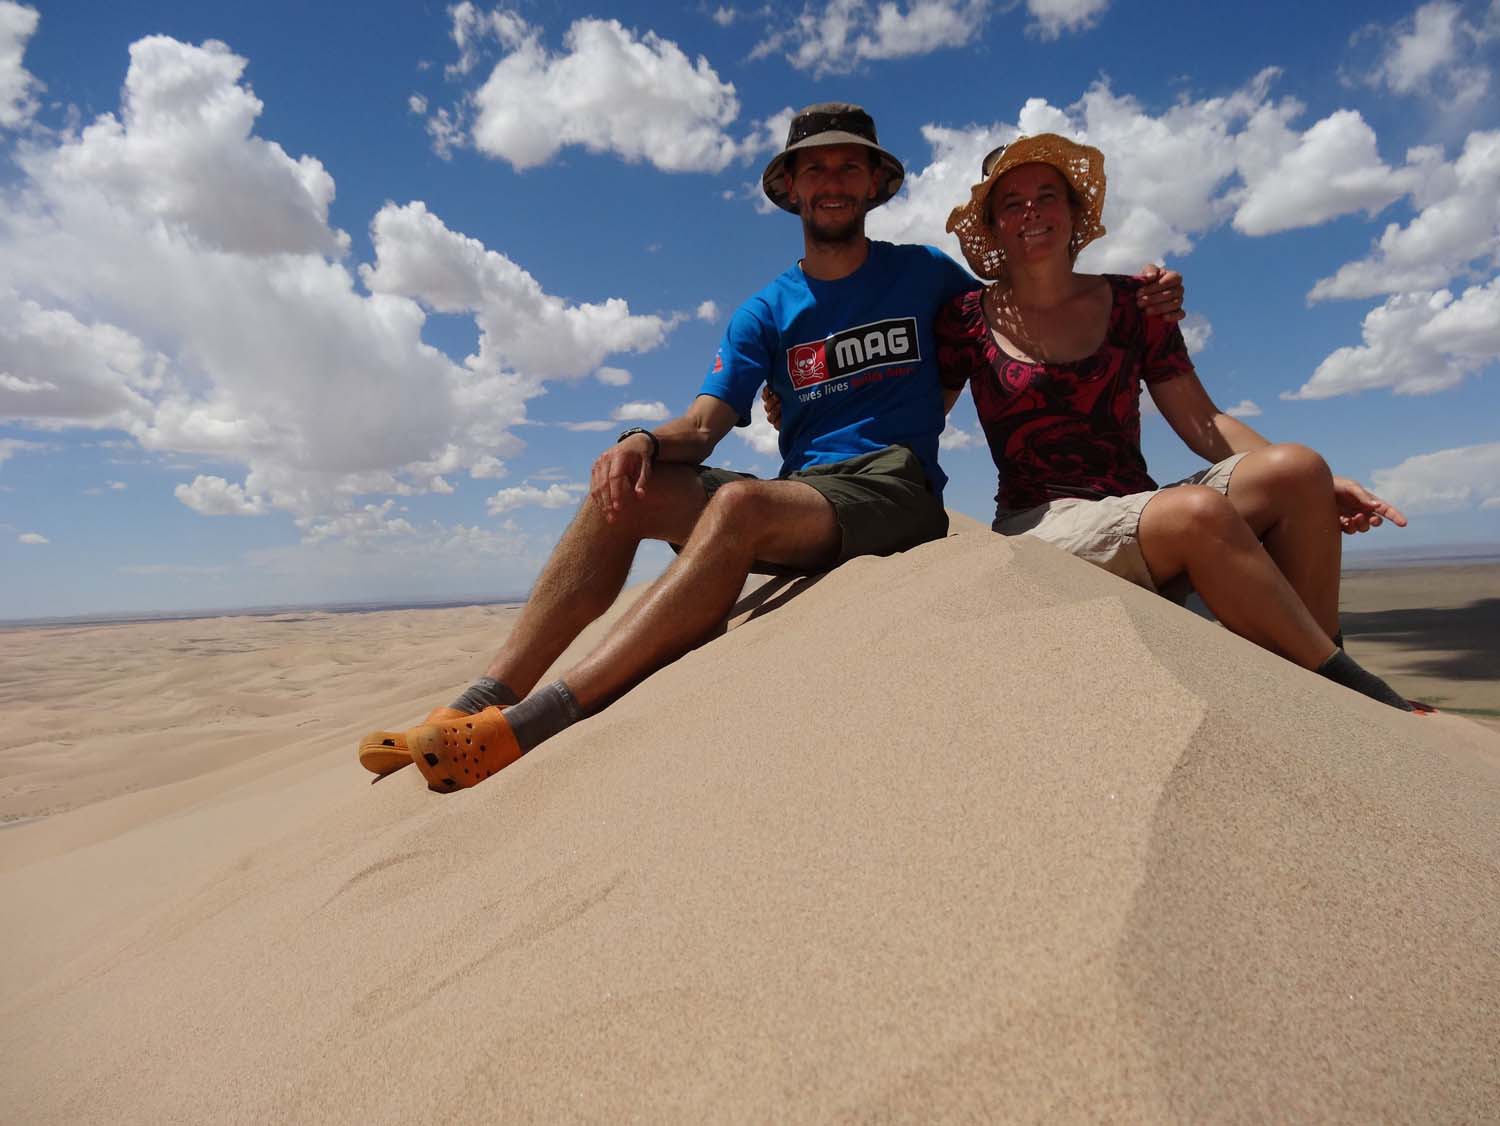 stunning views are our reward after a slow hike to the top of the biggest sand dune